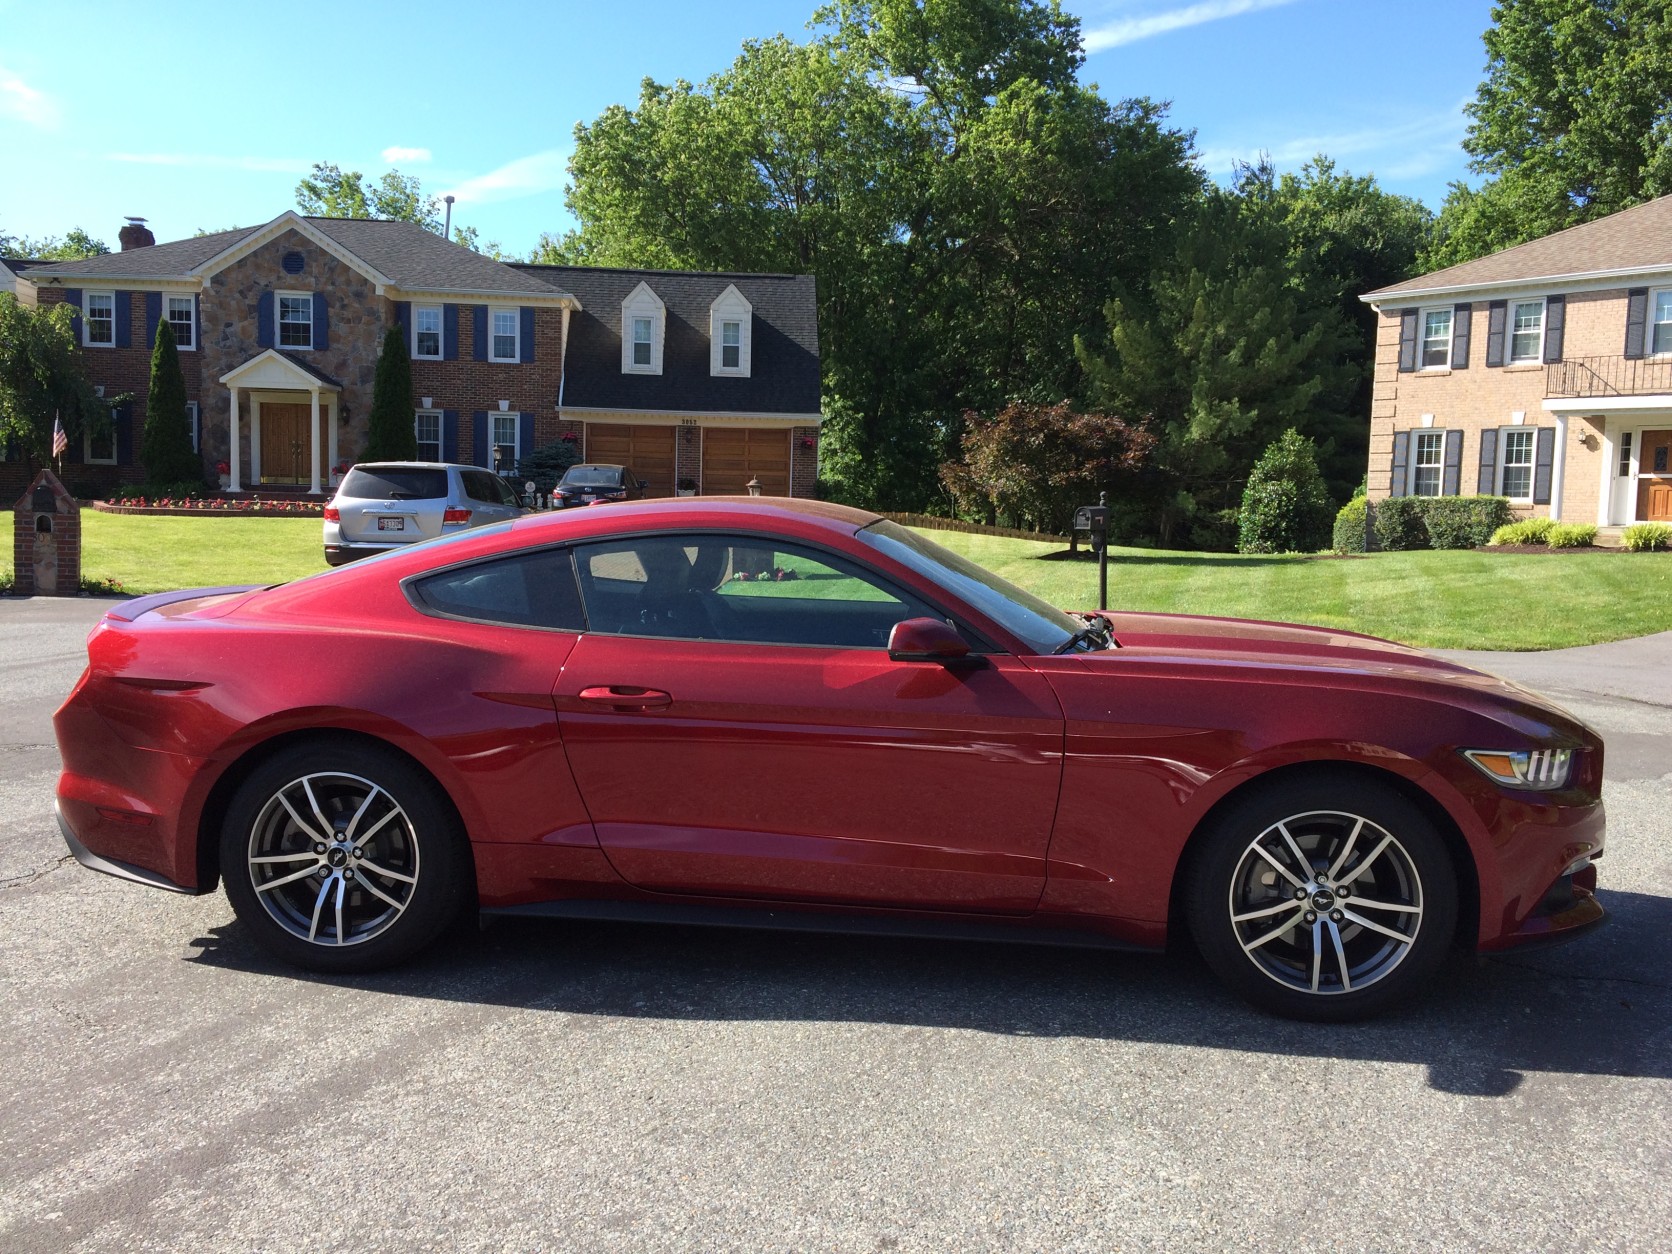 This look might be what’s needed to bring in a first-time Ford buyer. (WTOP/Mike Parris)